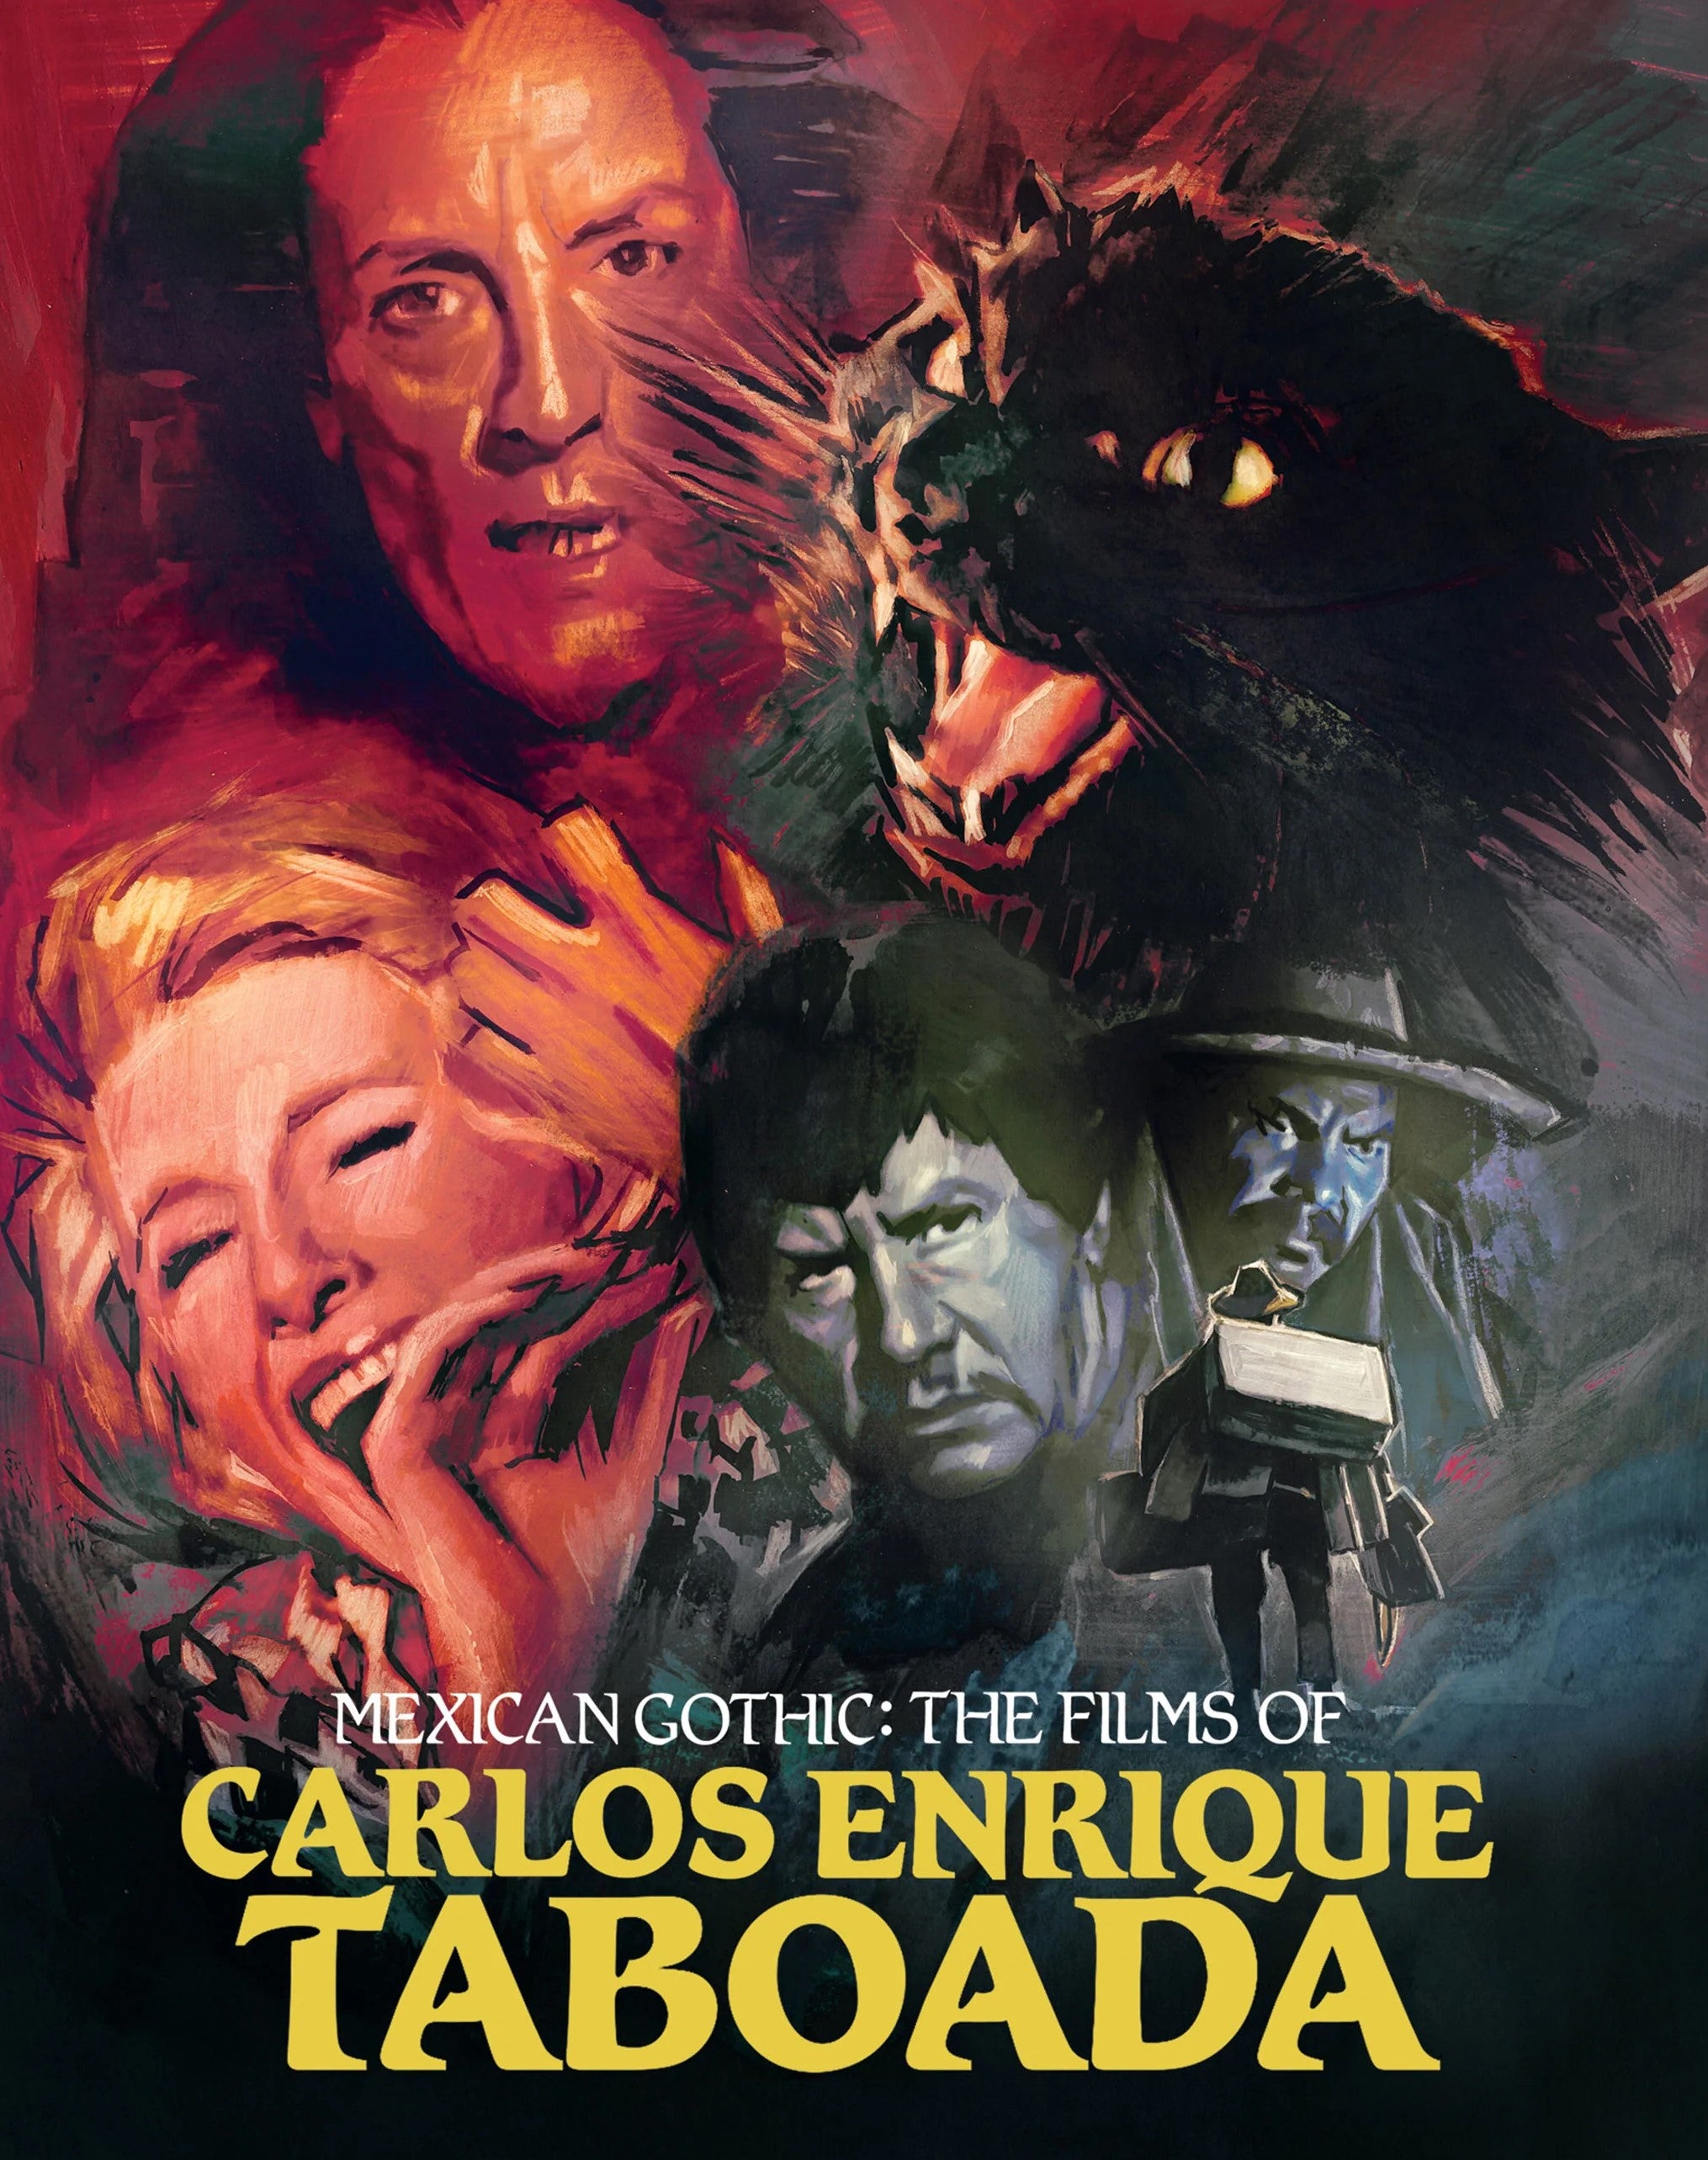 MEXICAN GOTHIC: THE FILMS OF CARLOS ENRIQUE TABOADA (LIMITED EDITION) BLU-RAY